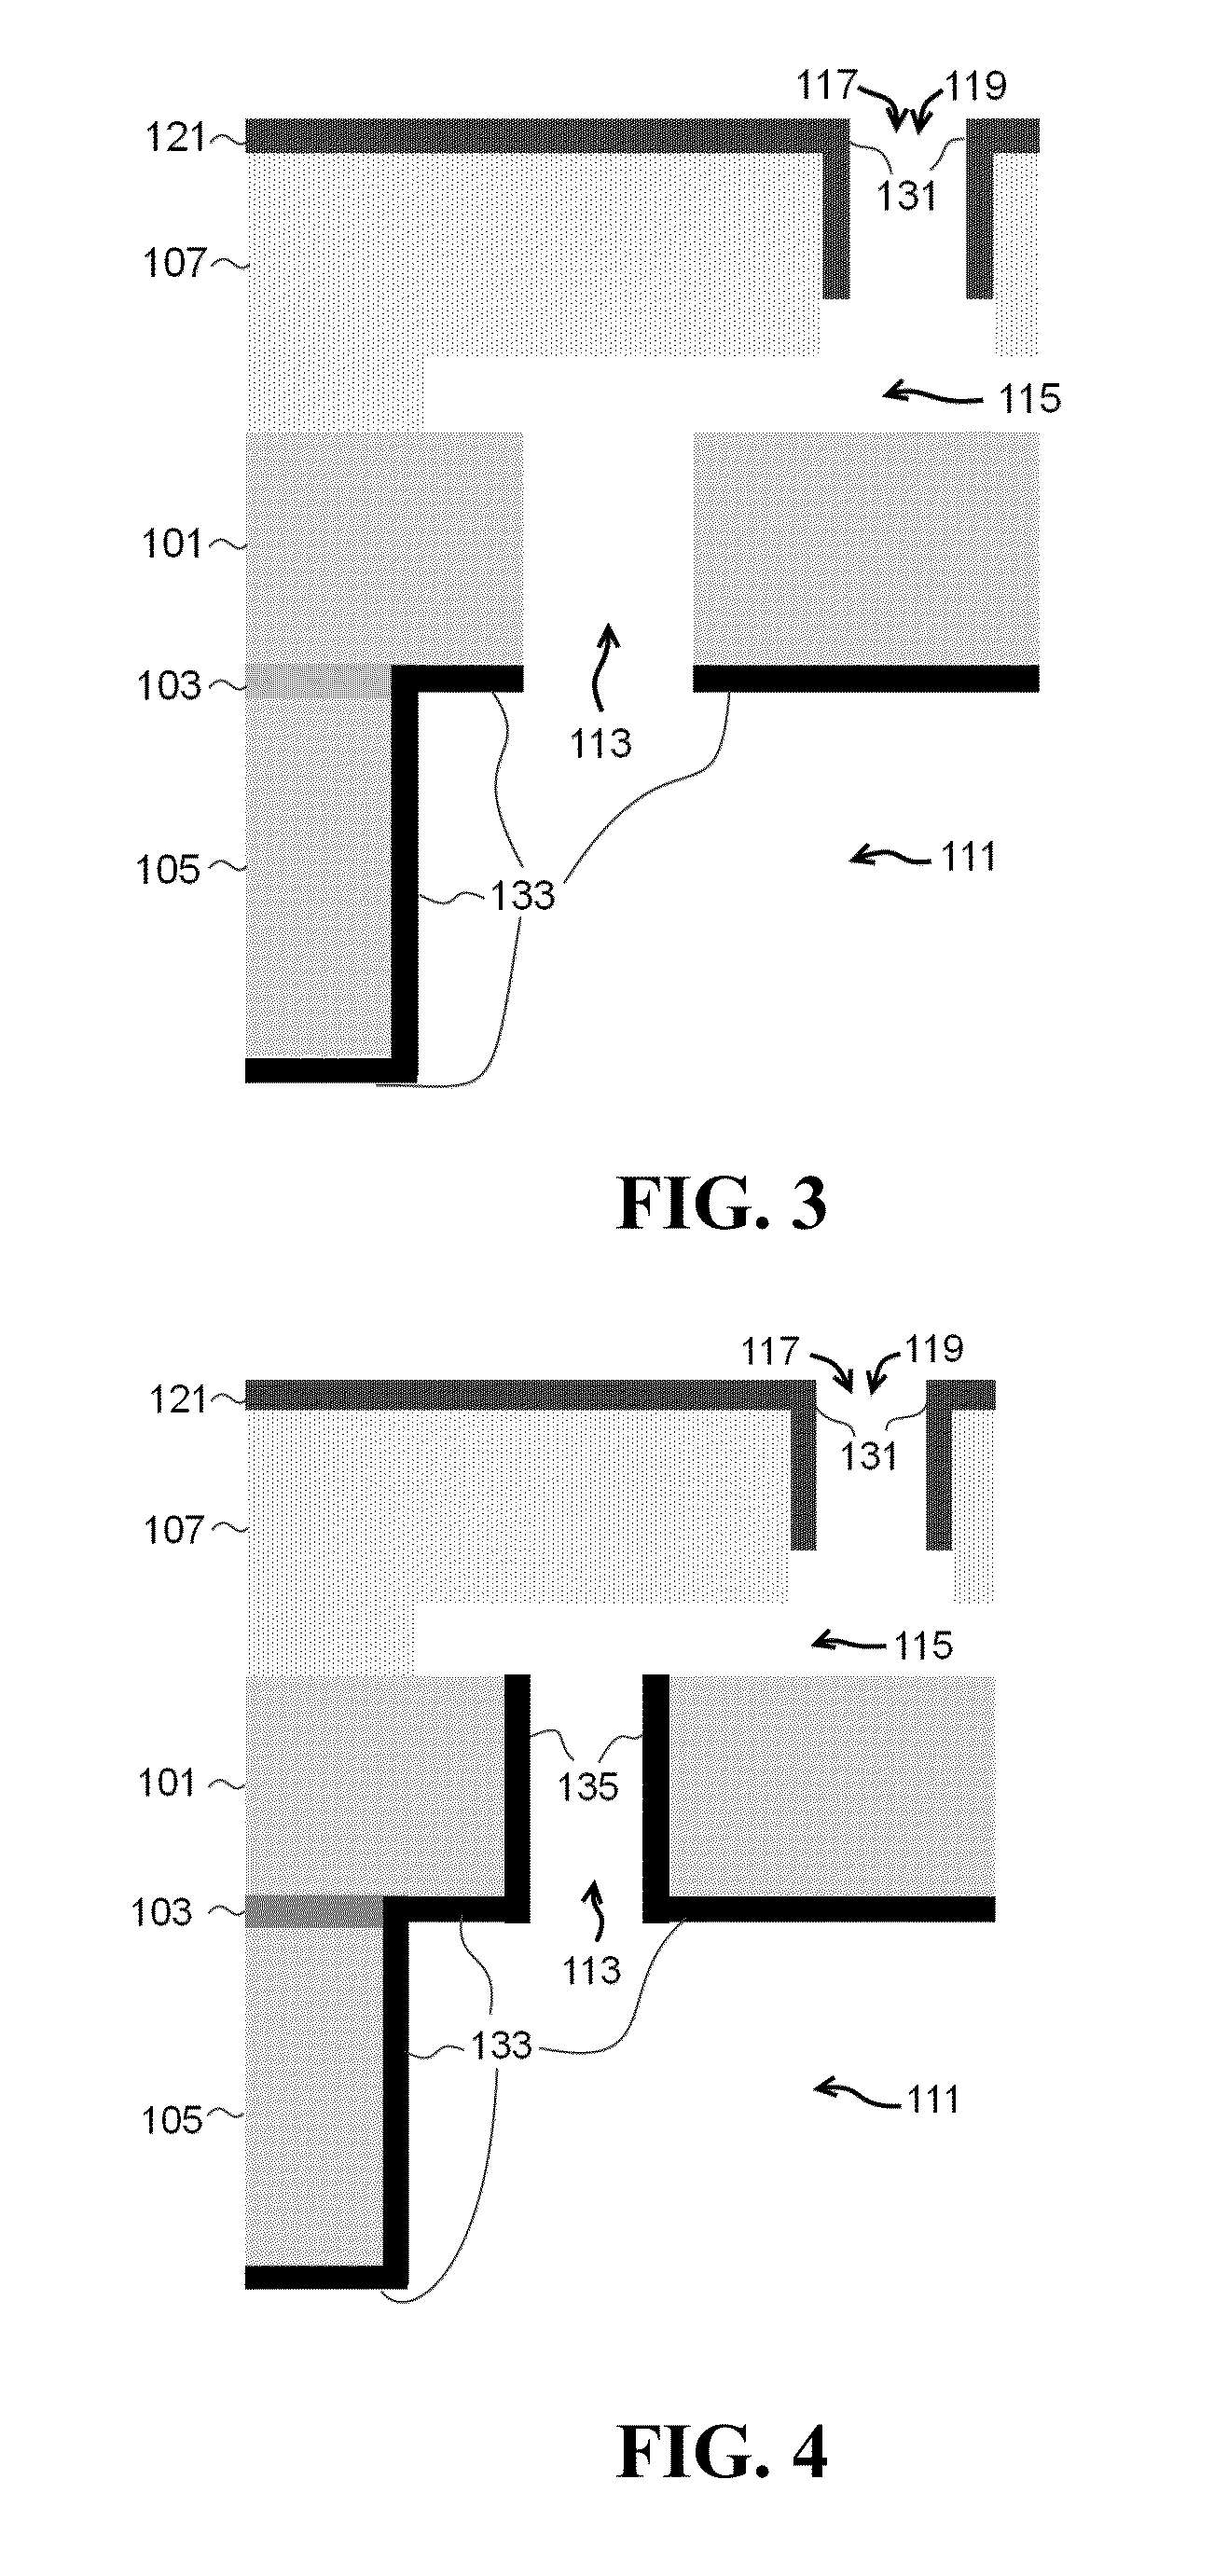 Nanochanneled device with electrodes and related methods